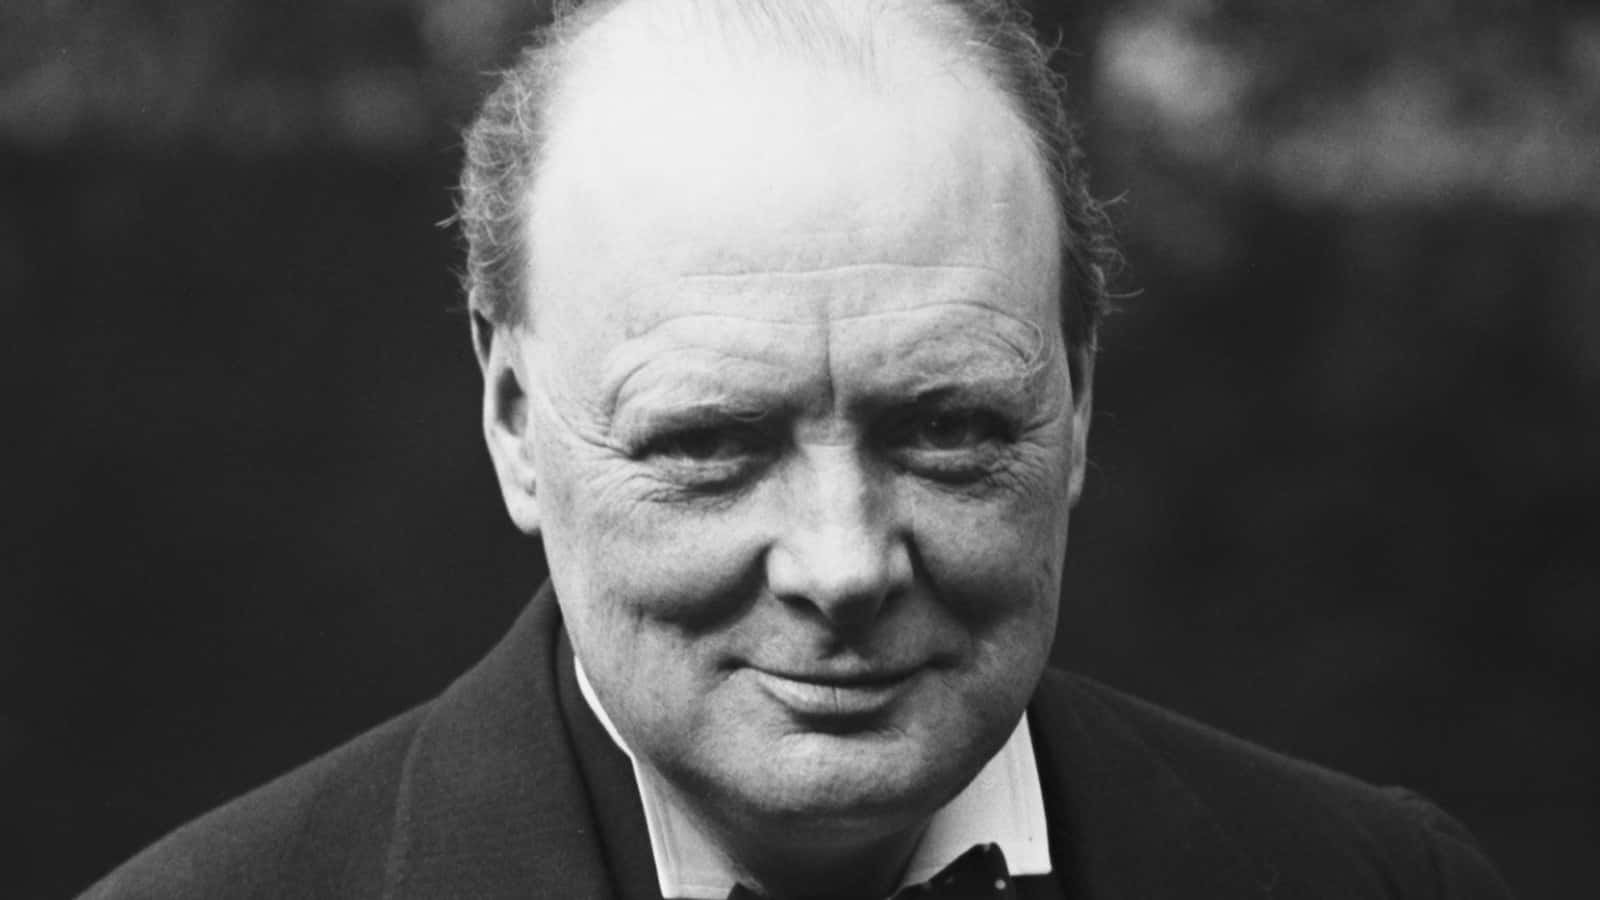 A Black And White Photo Of A Man In A Suit